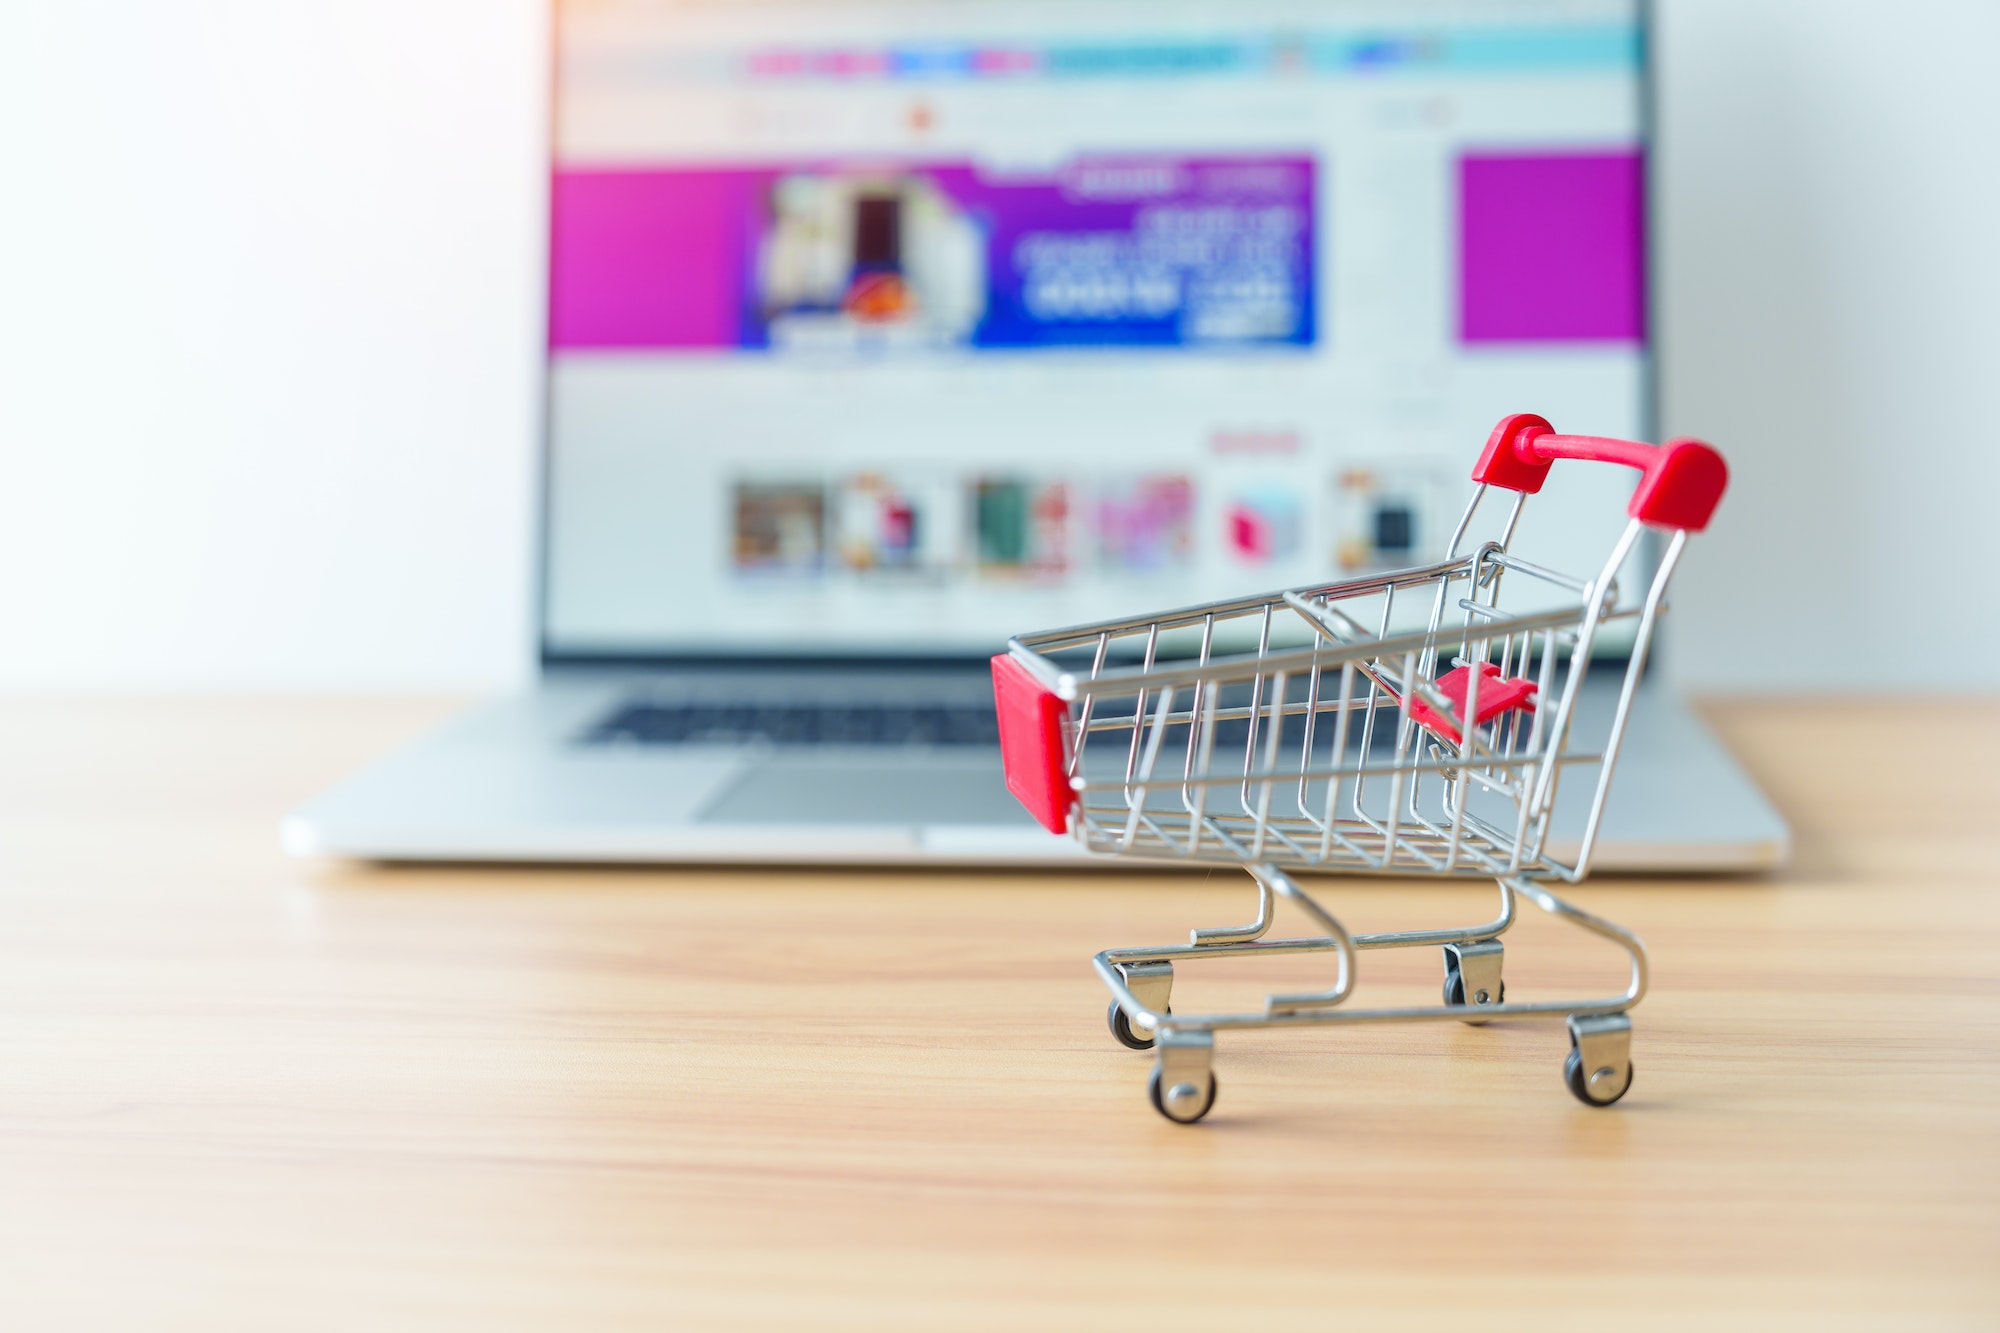 Shopping cart and laptop computer with marketplace website.